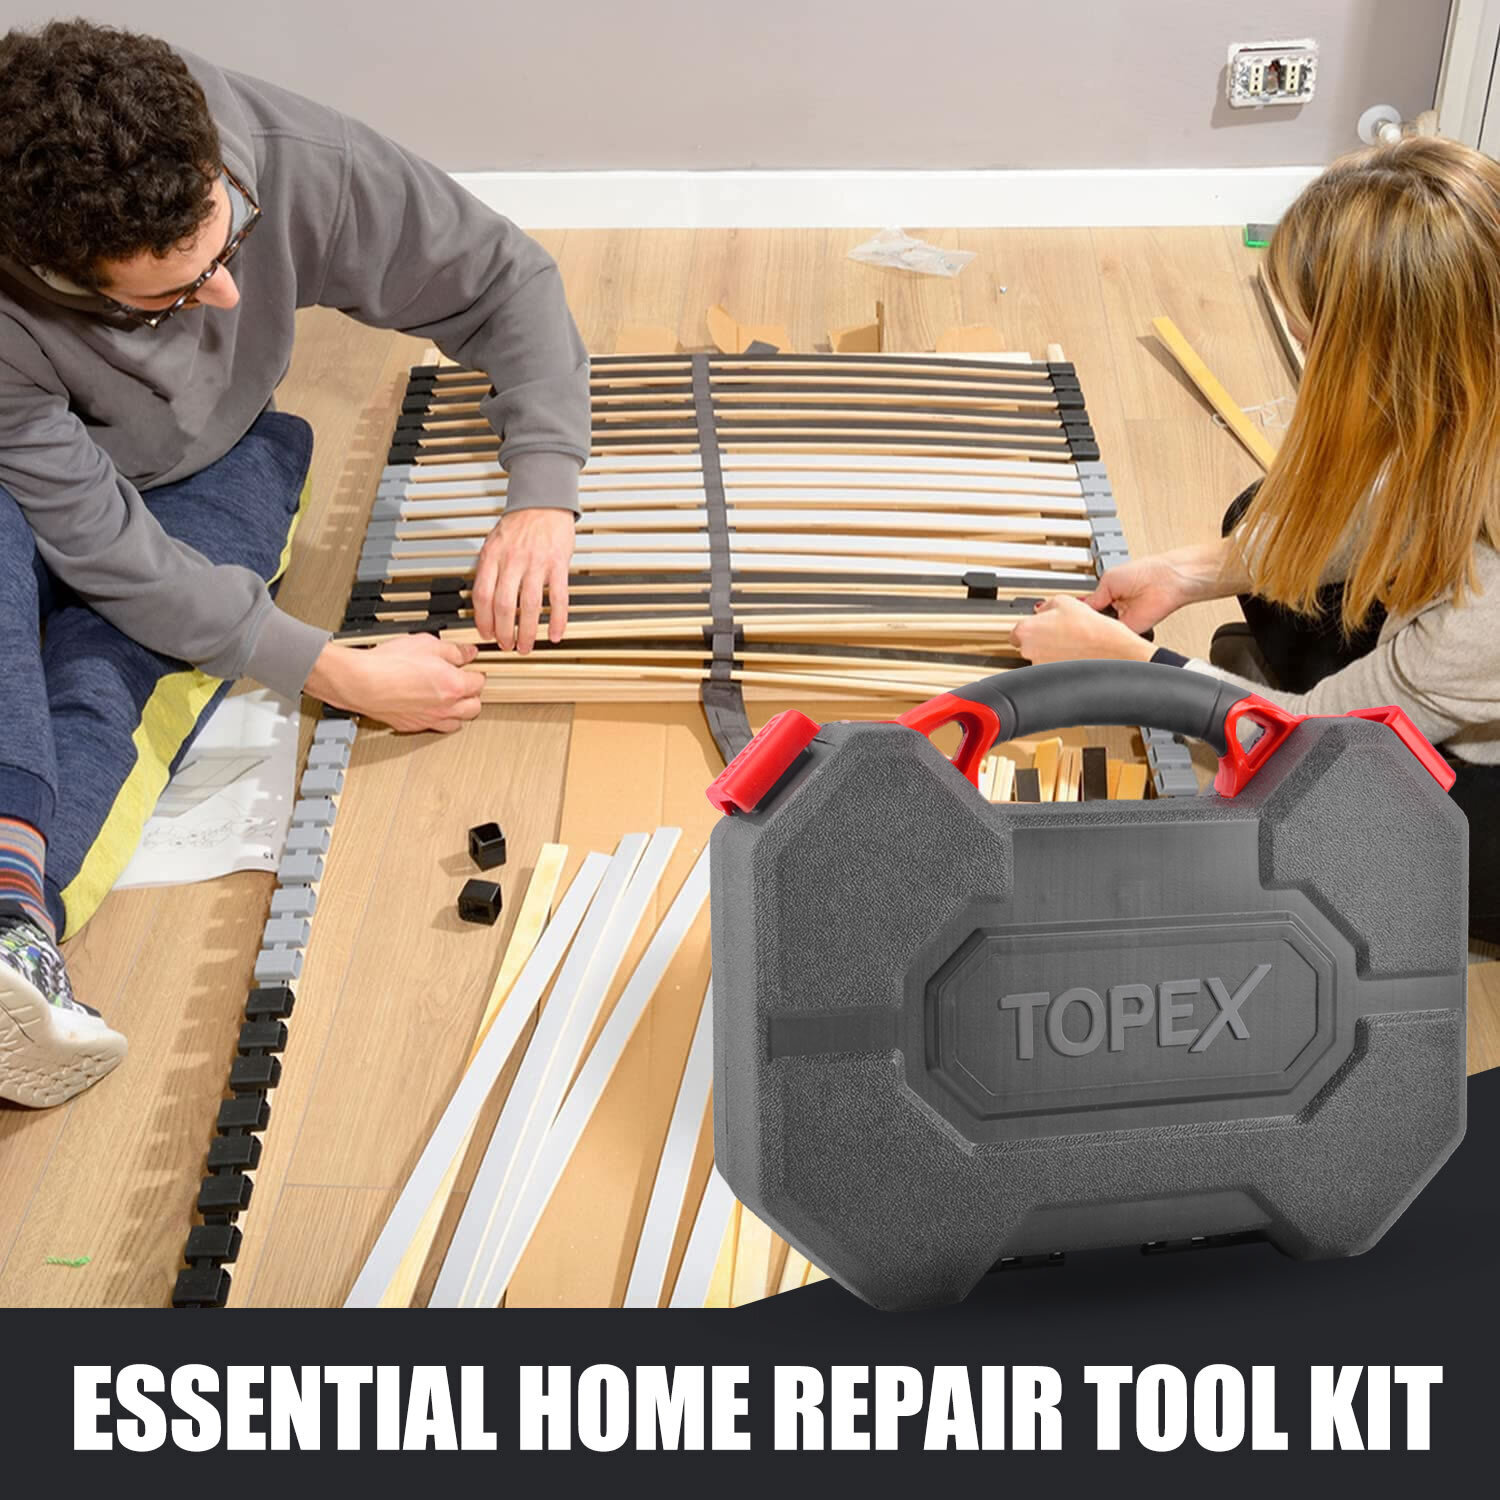 TOPEX 52-Piece Hand Tool Kit Portable Home/Auto Repair Set w/ Ratchet Wrench, Pliers ,Screwdriver Kits and Storage Case